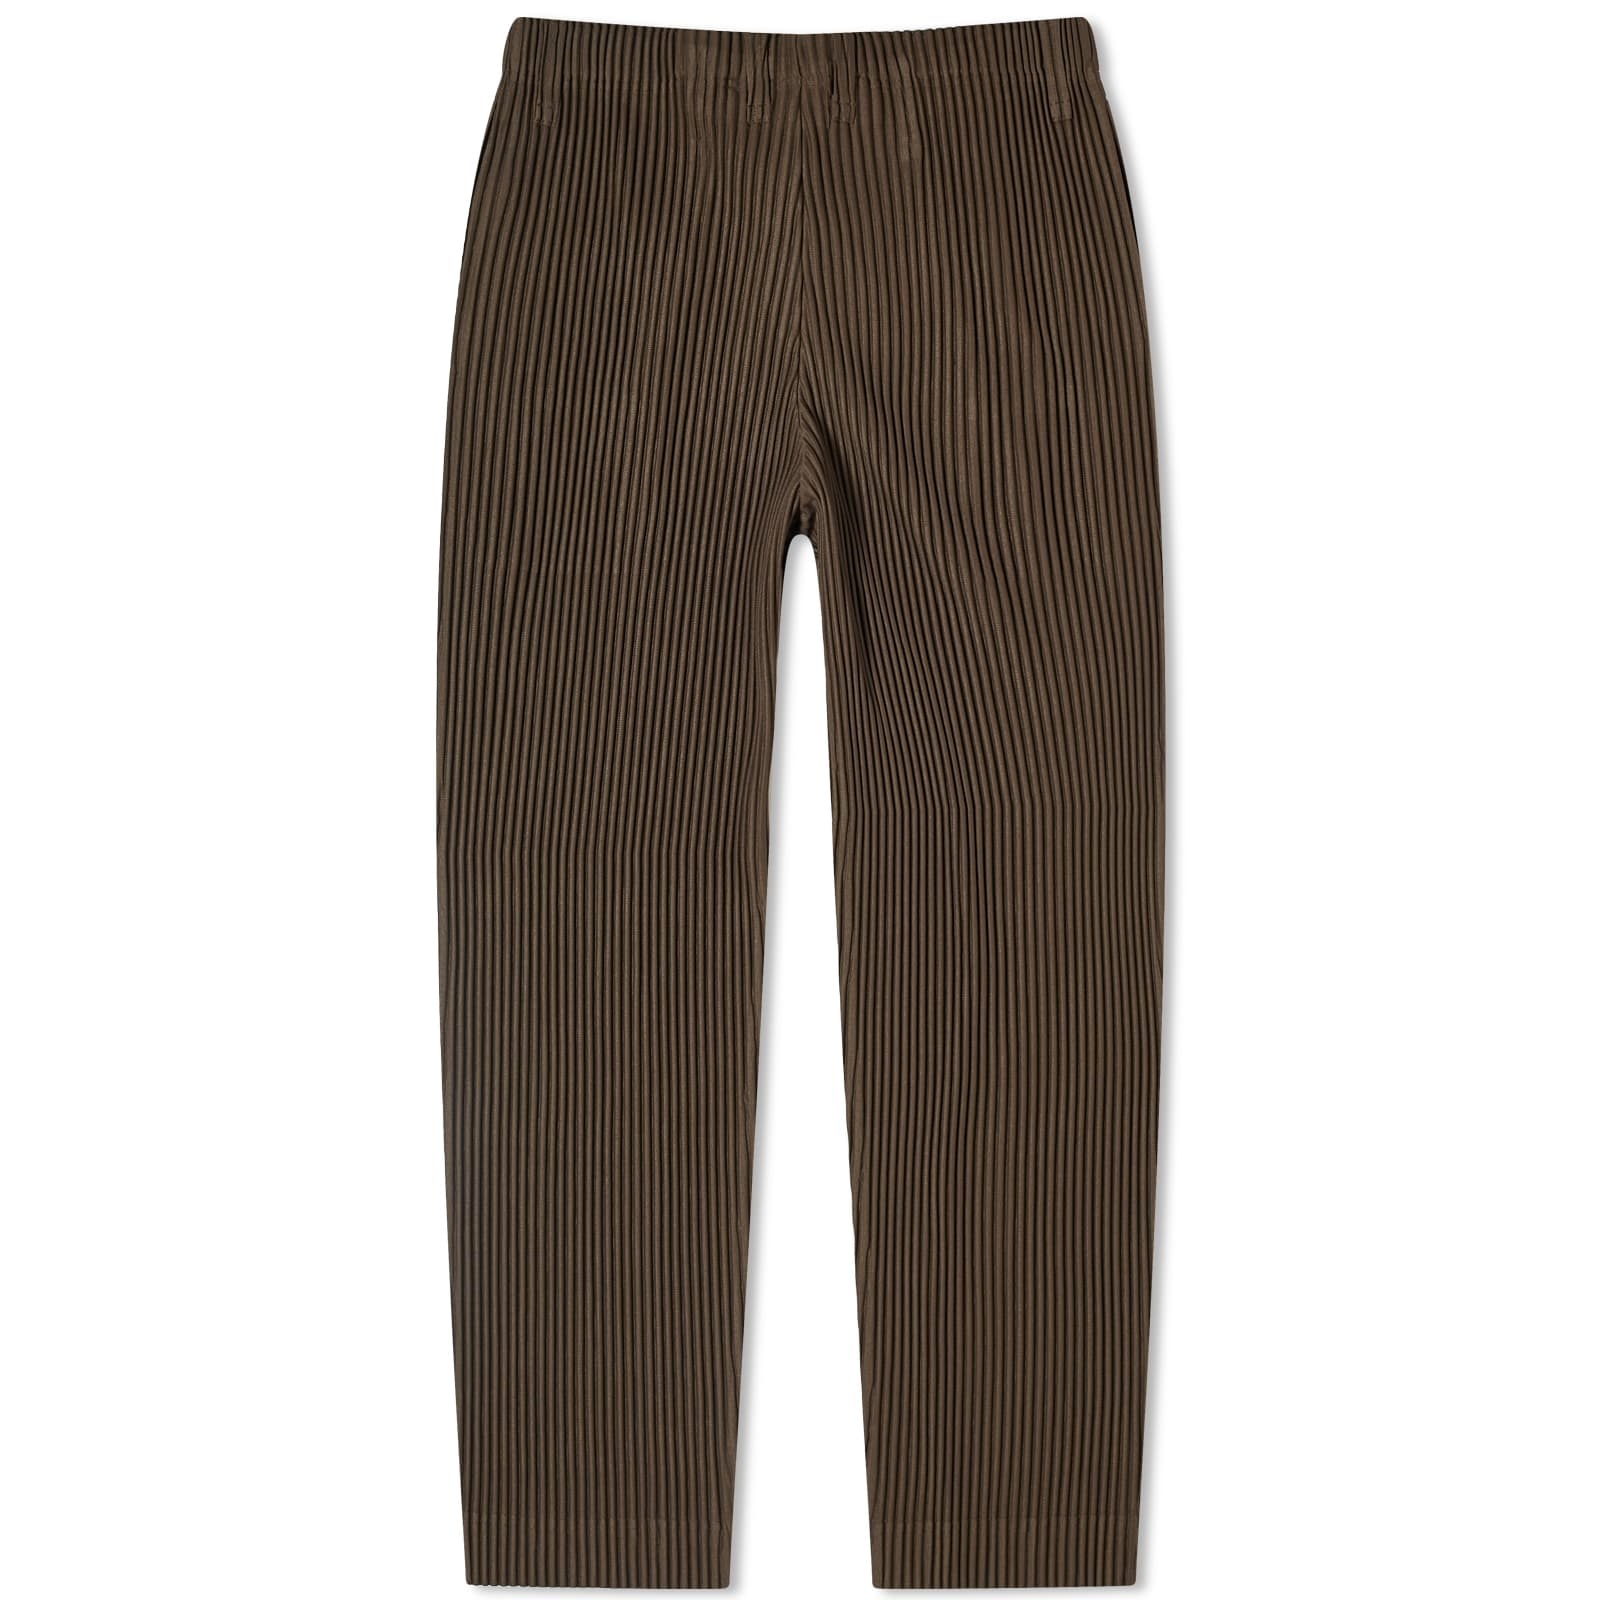 Homme Plissé Issey Miyake Pleated Straight Leg Trousers - 2